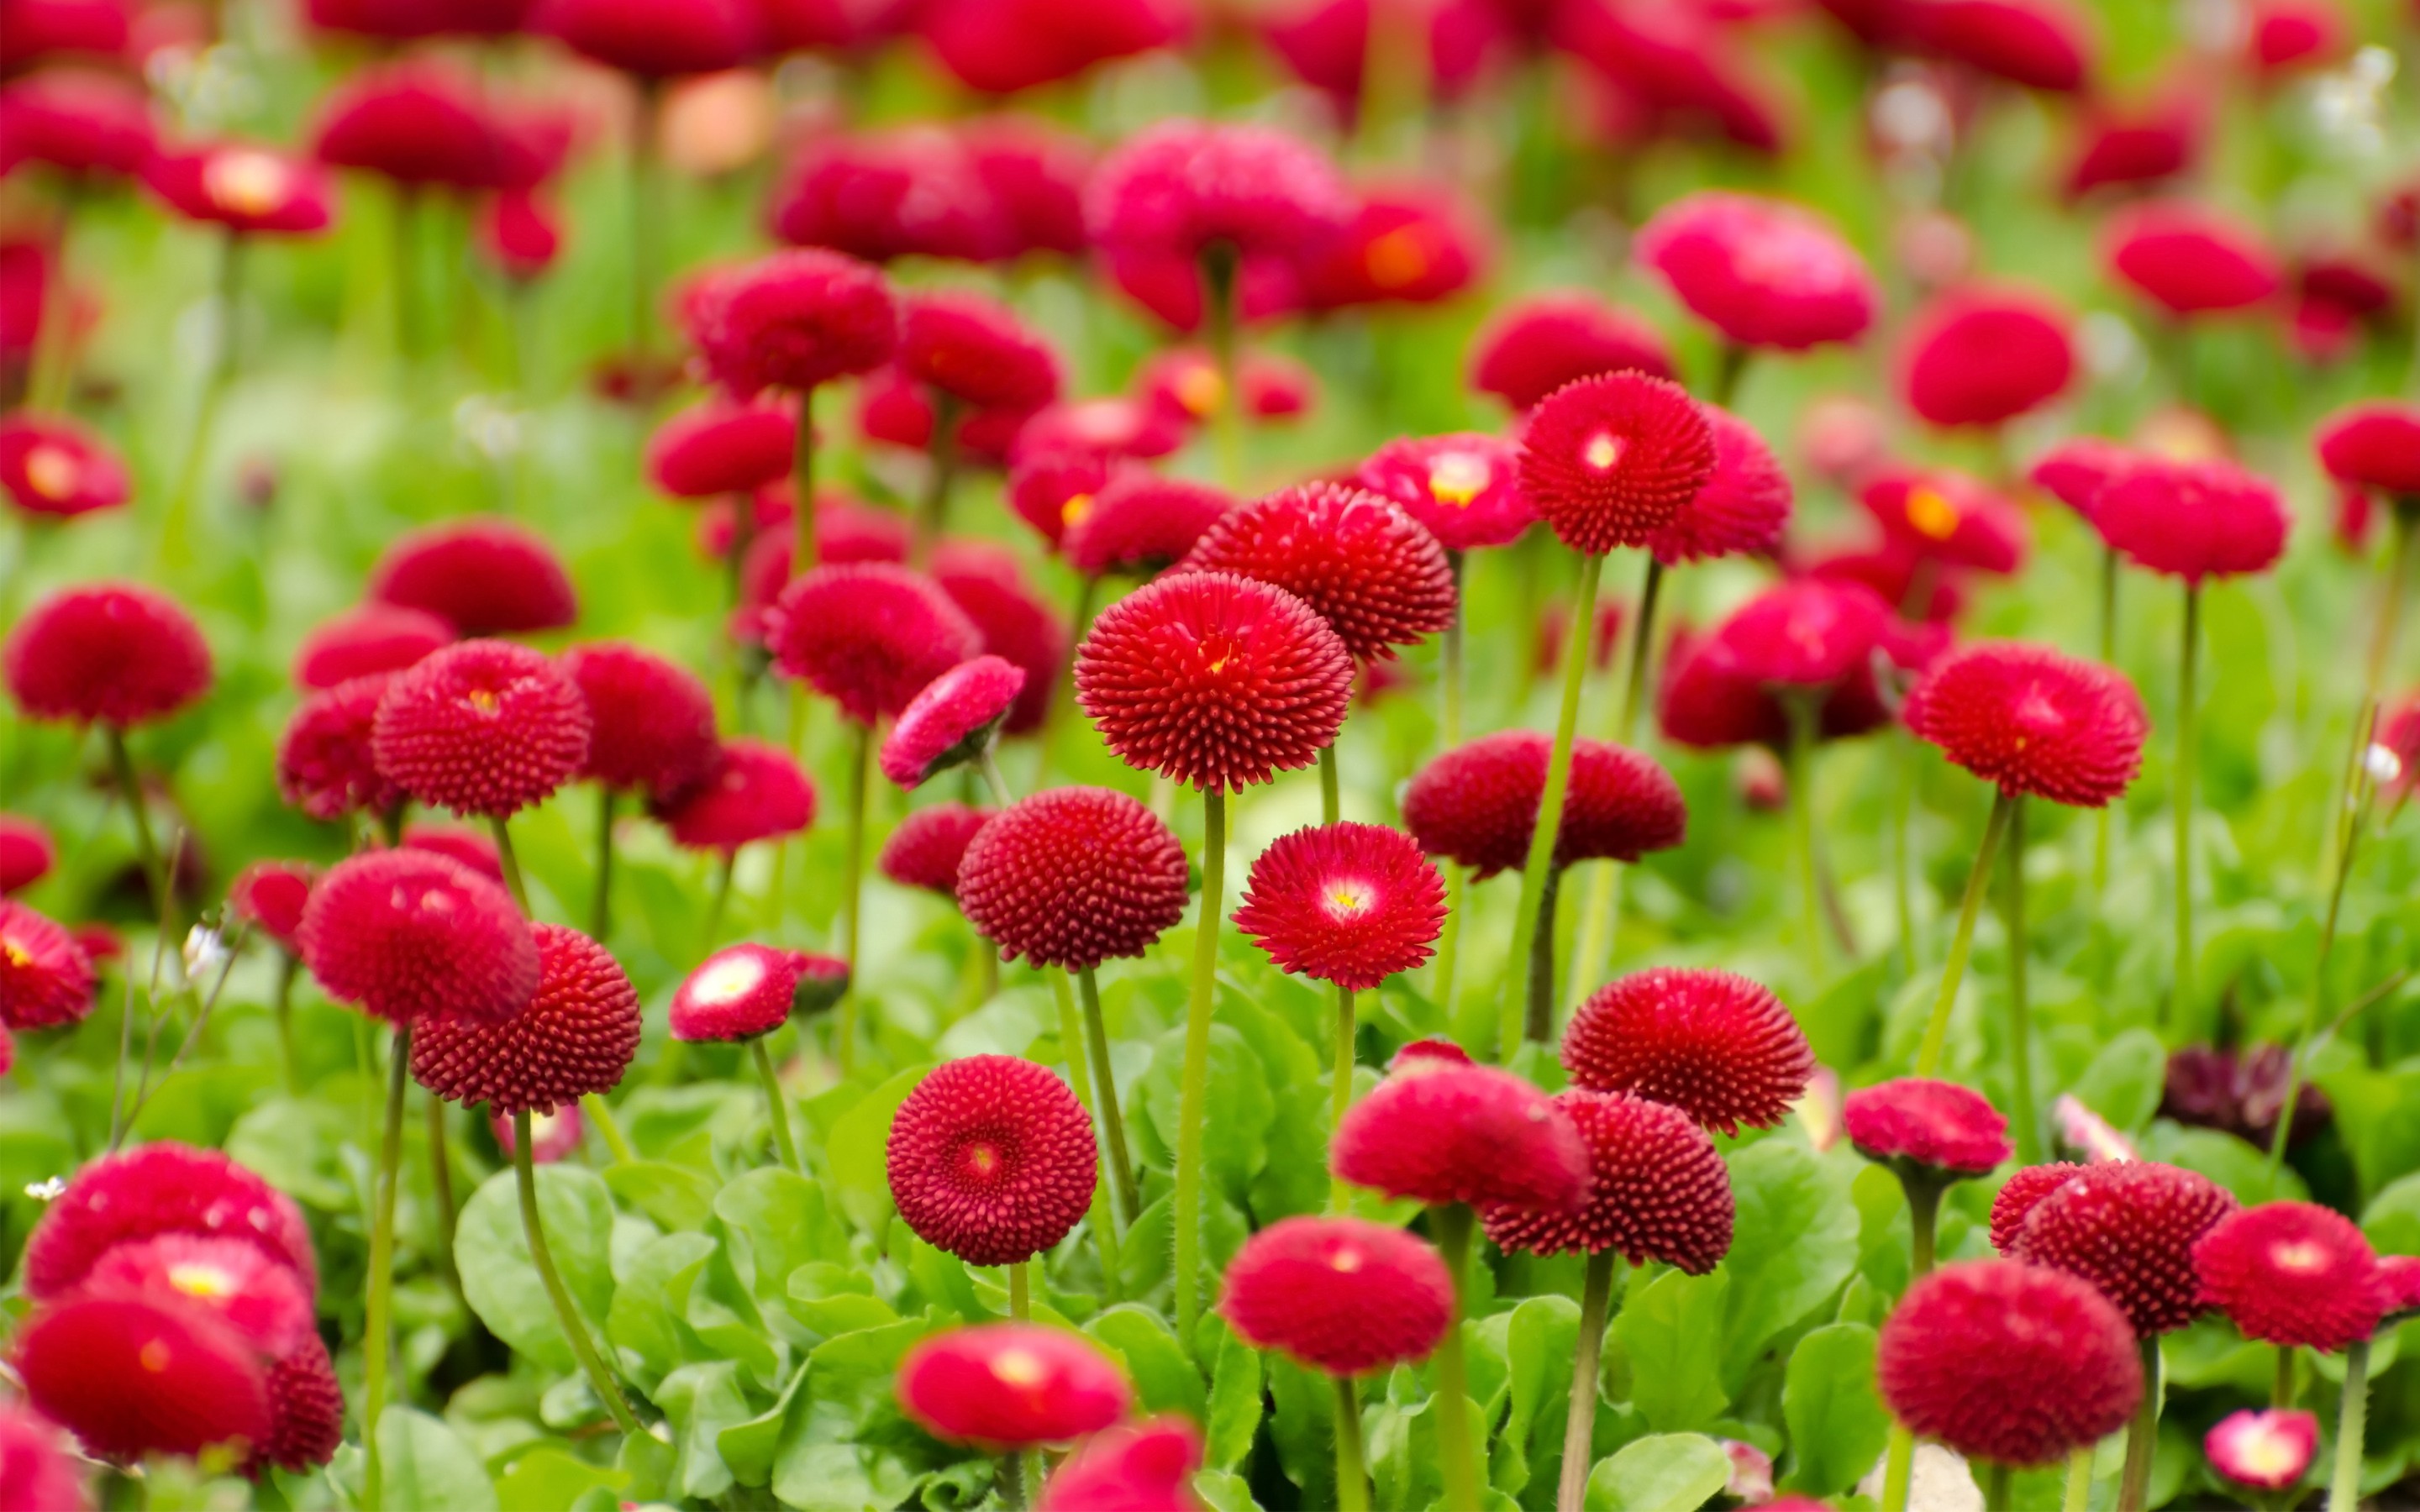 General 2880x1800 nature plants flowers red flowers